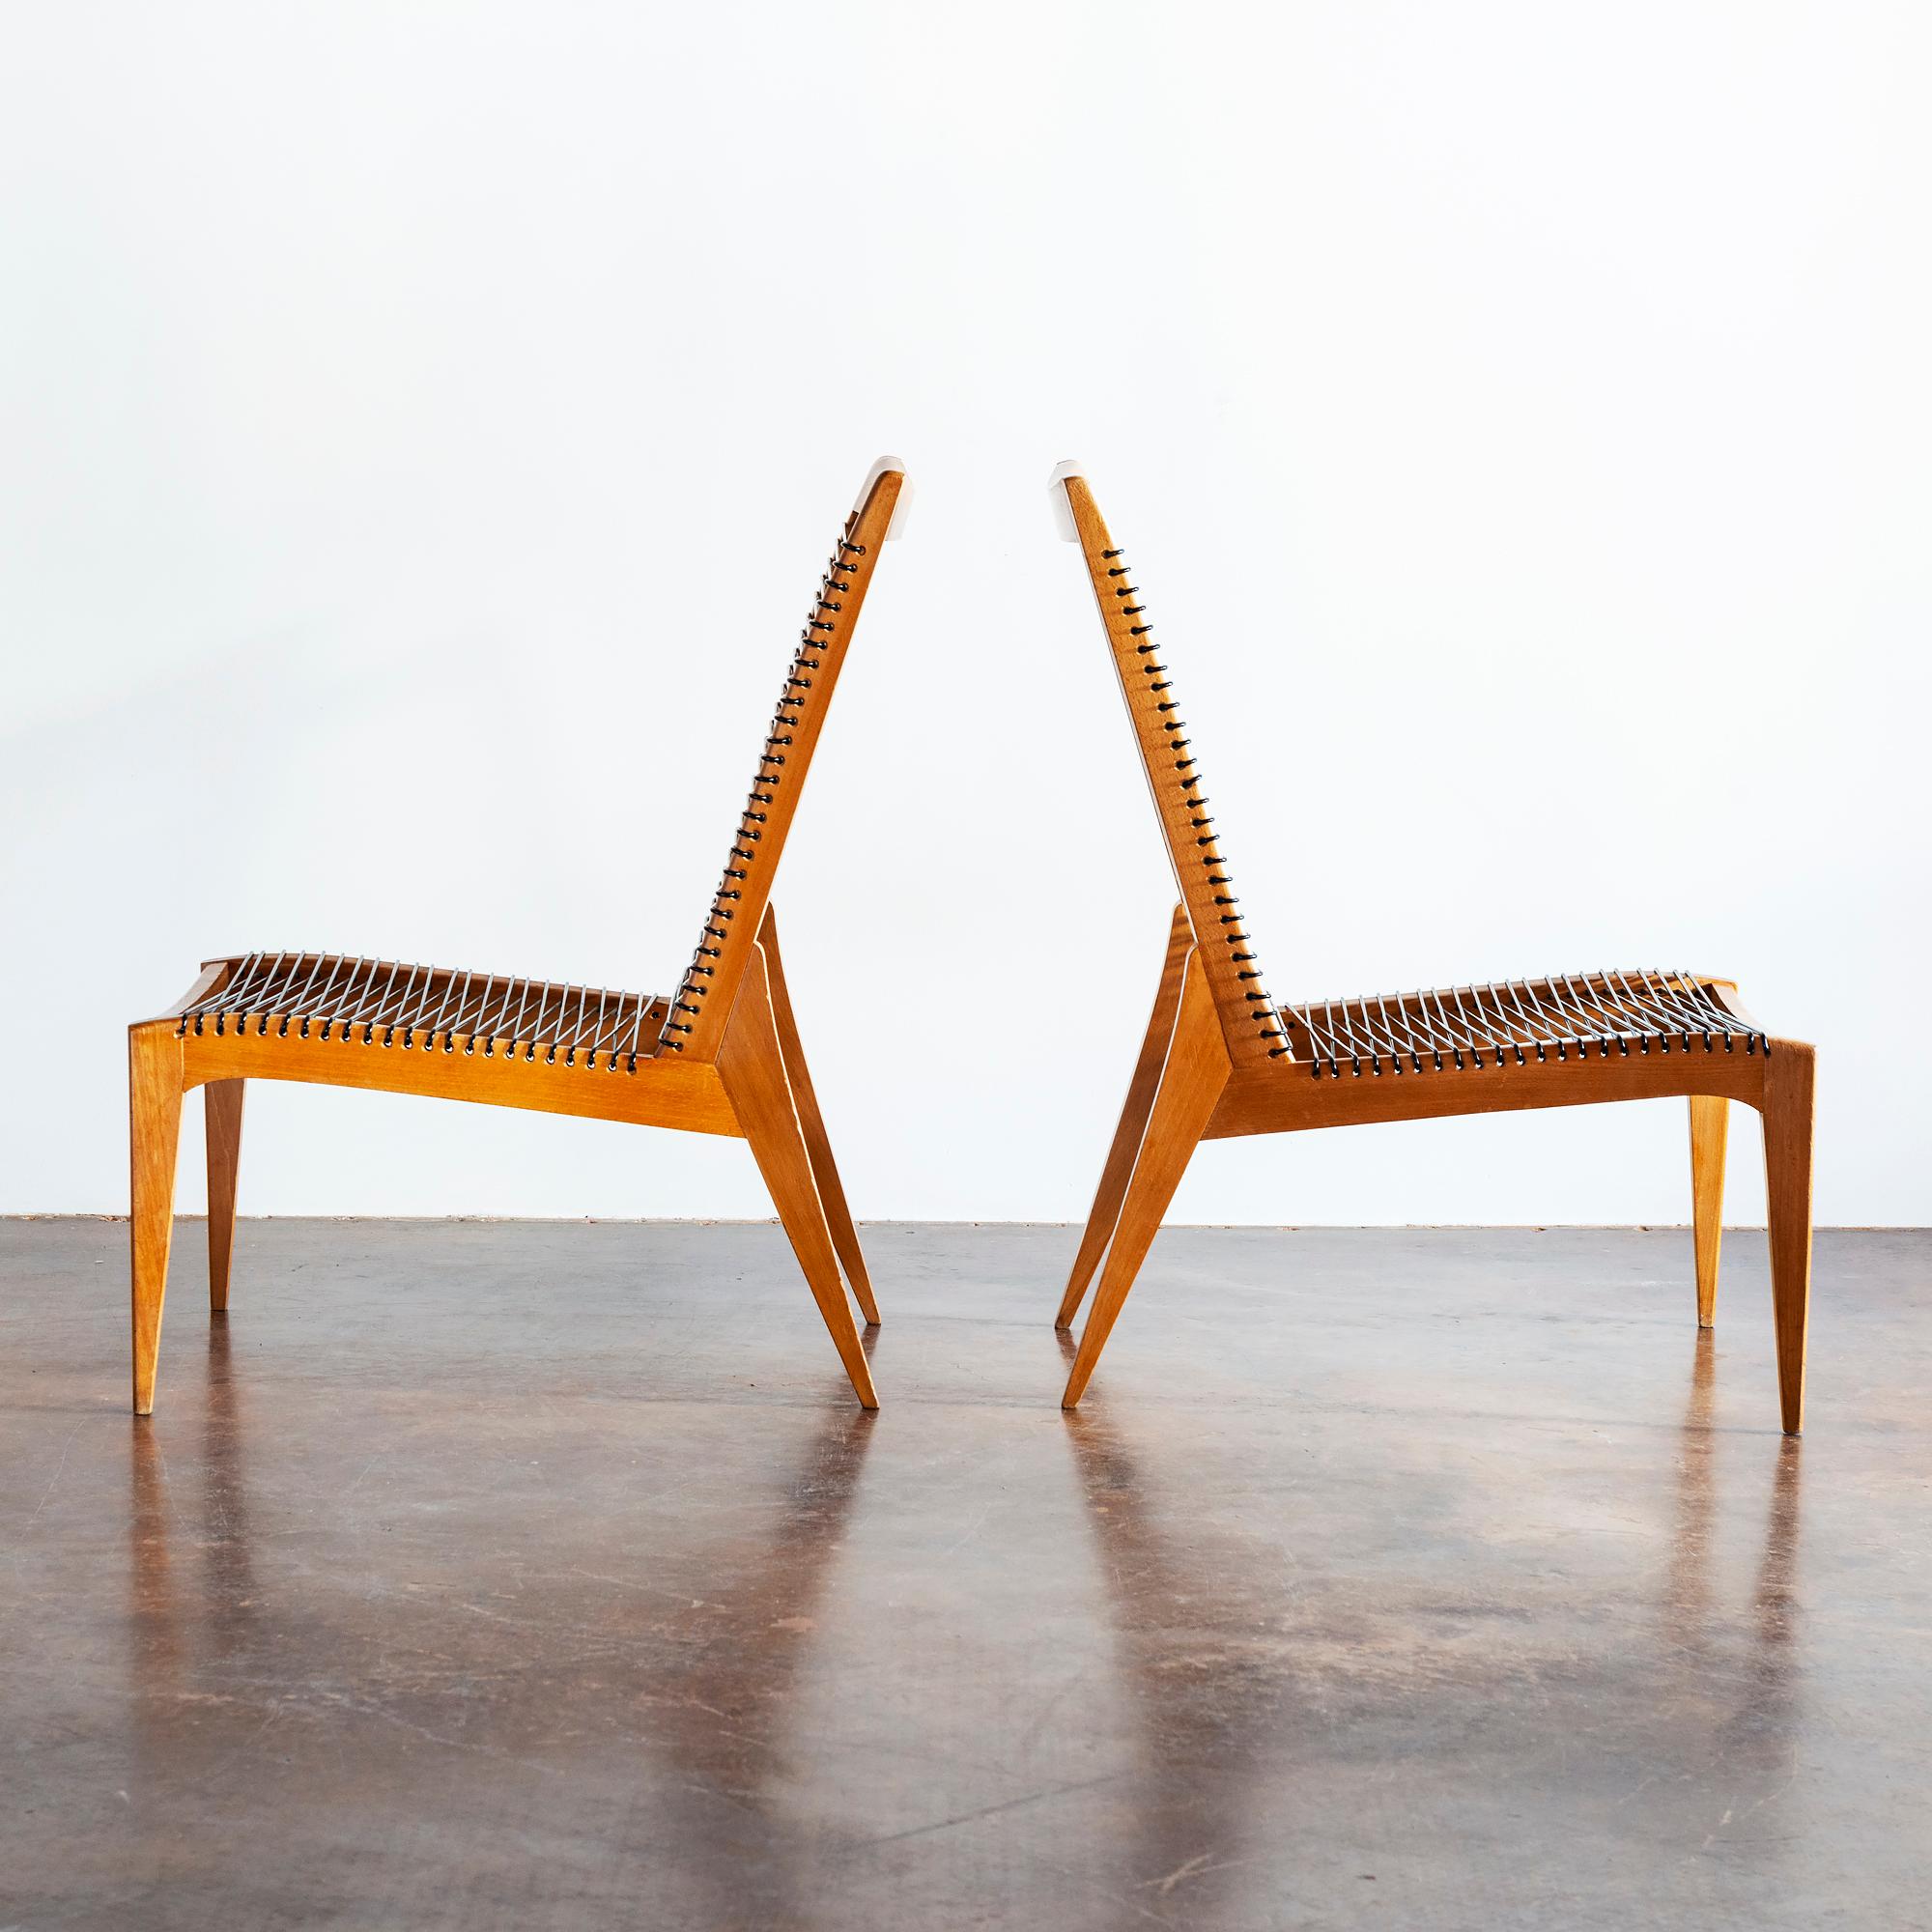 A pair of elegant Louis Sognot lounge chairs in oak and cord, France, 1950s.